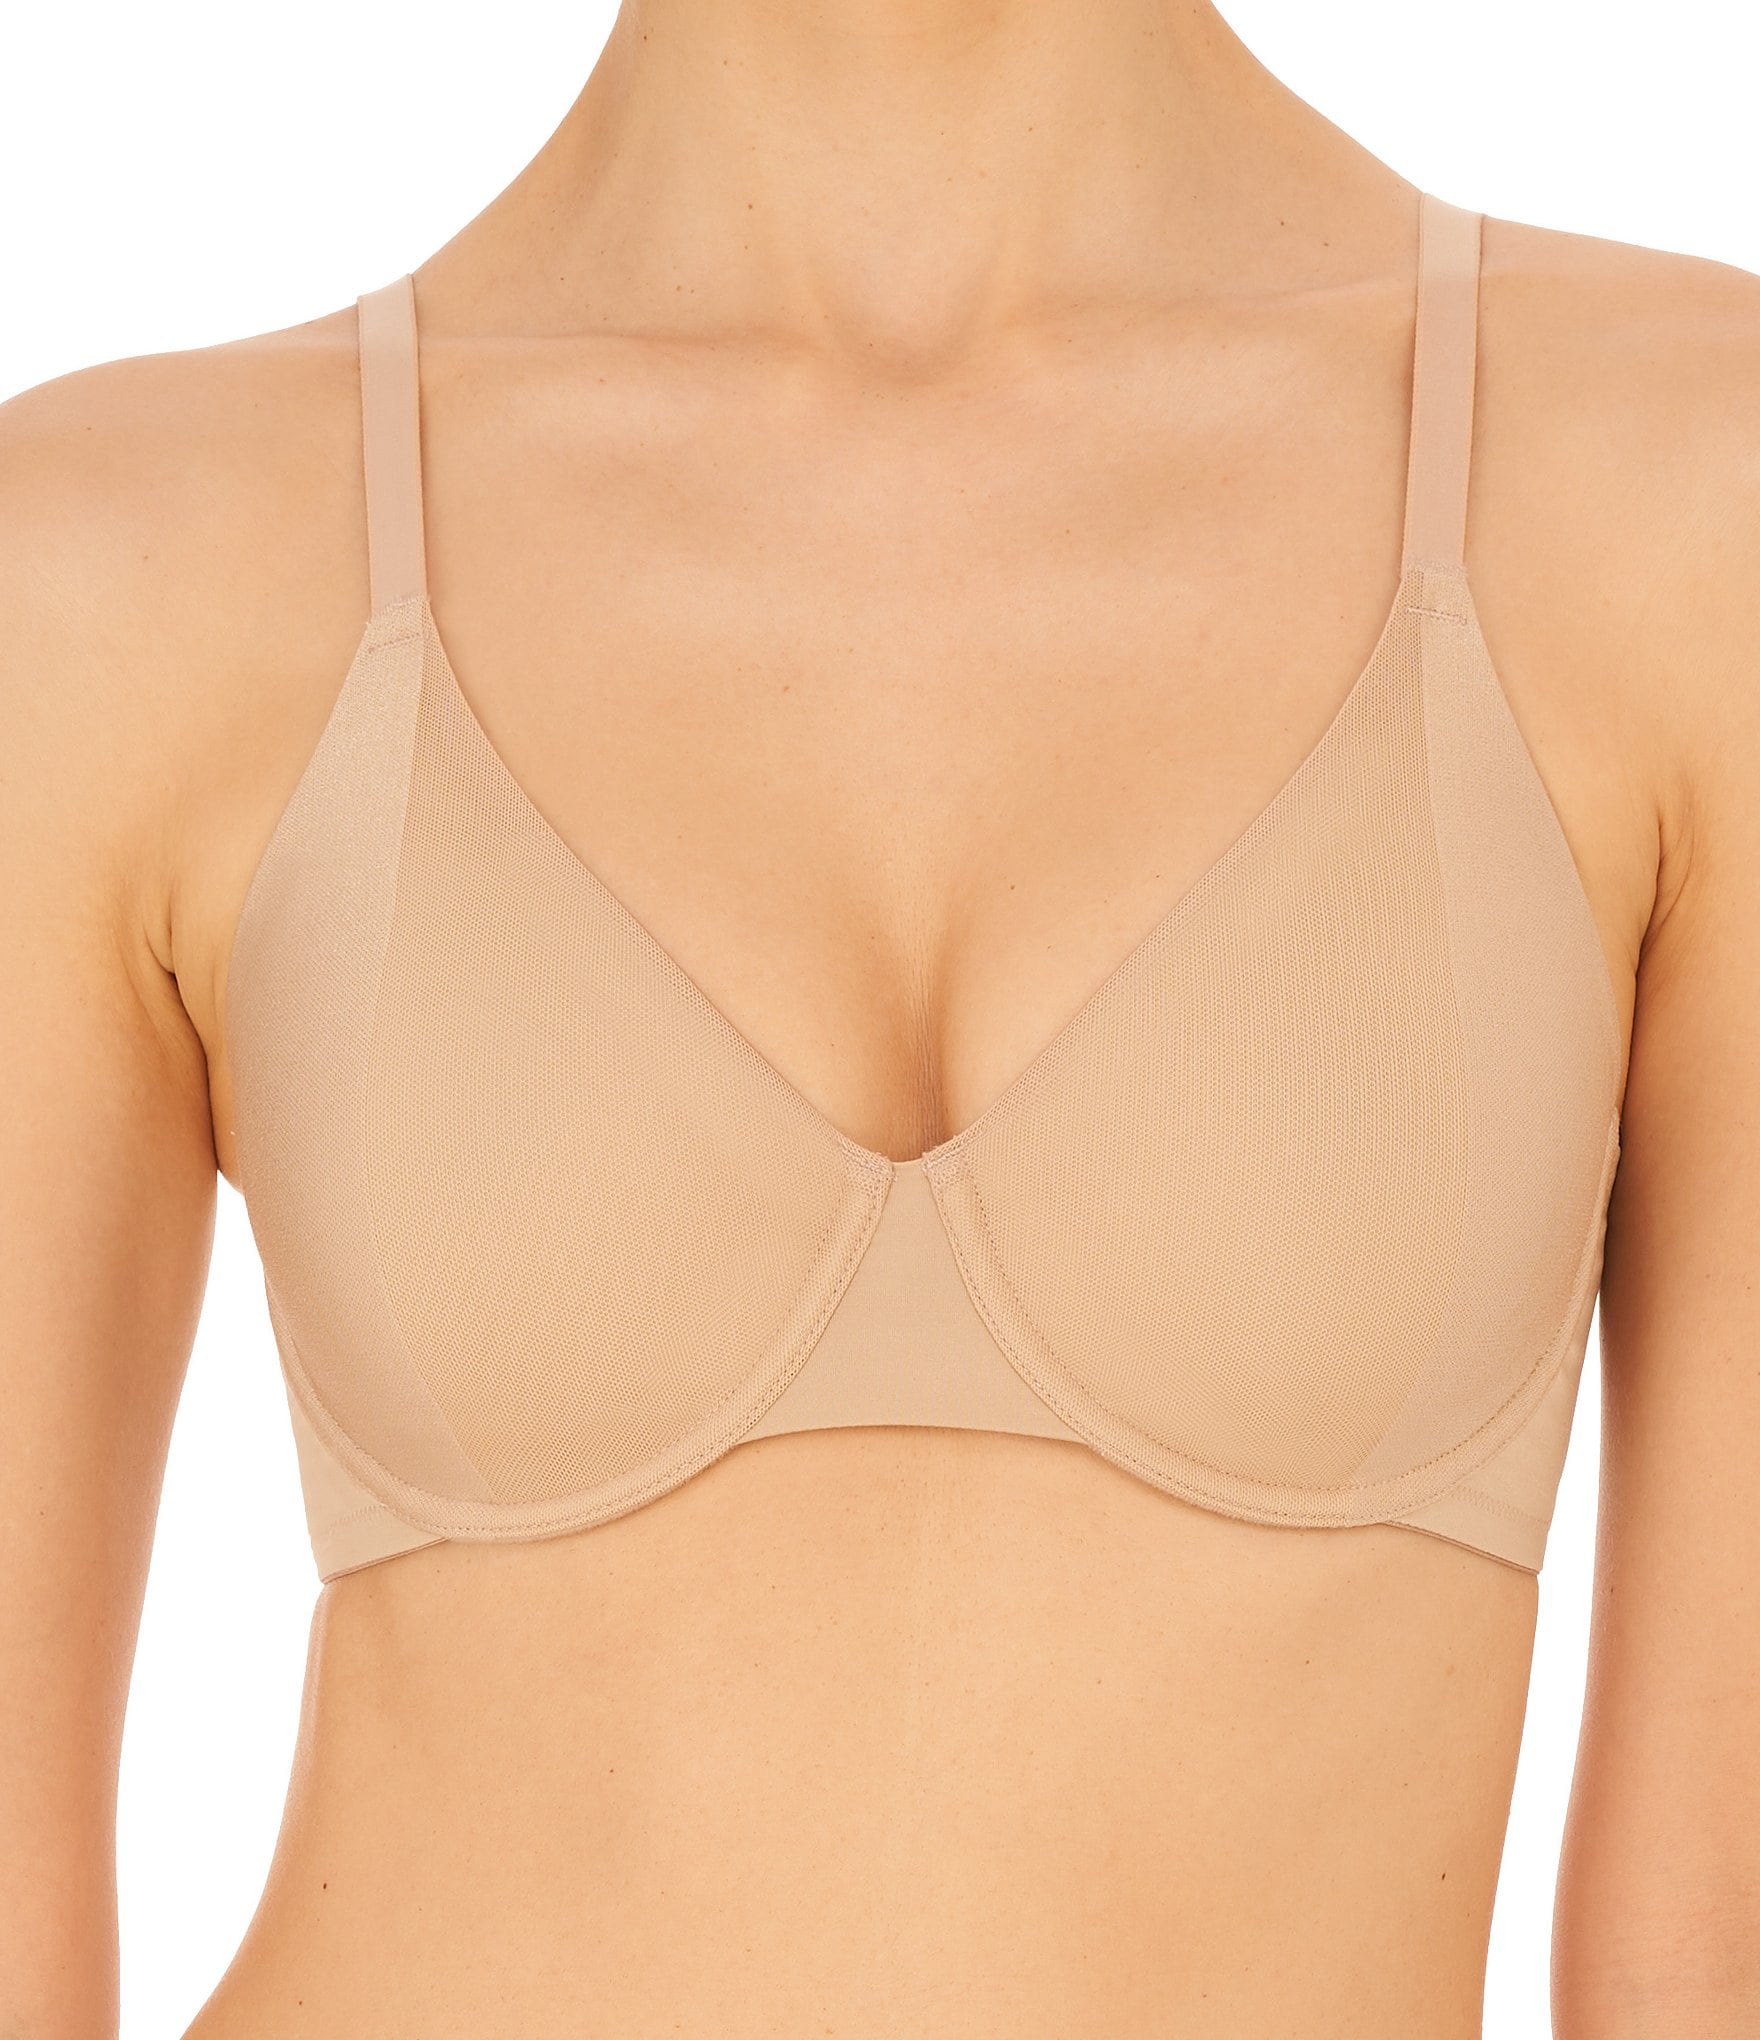 Bras N Things Body Bliss Full Cup Bra - Nude 6 - NUDE 6 - ShopStyle